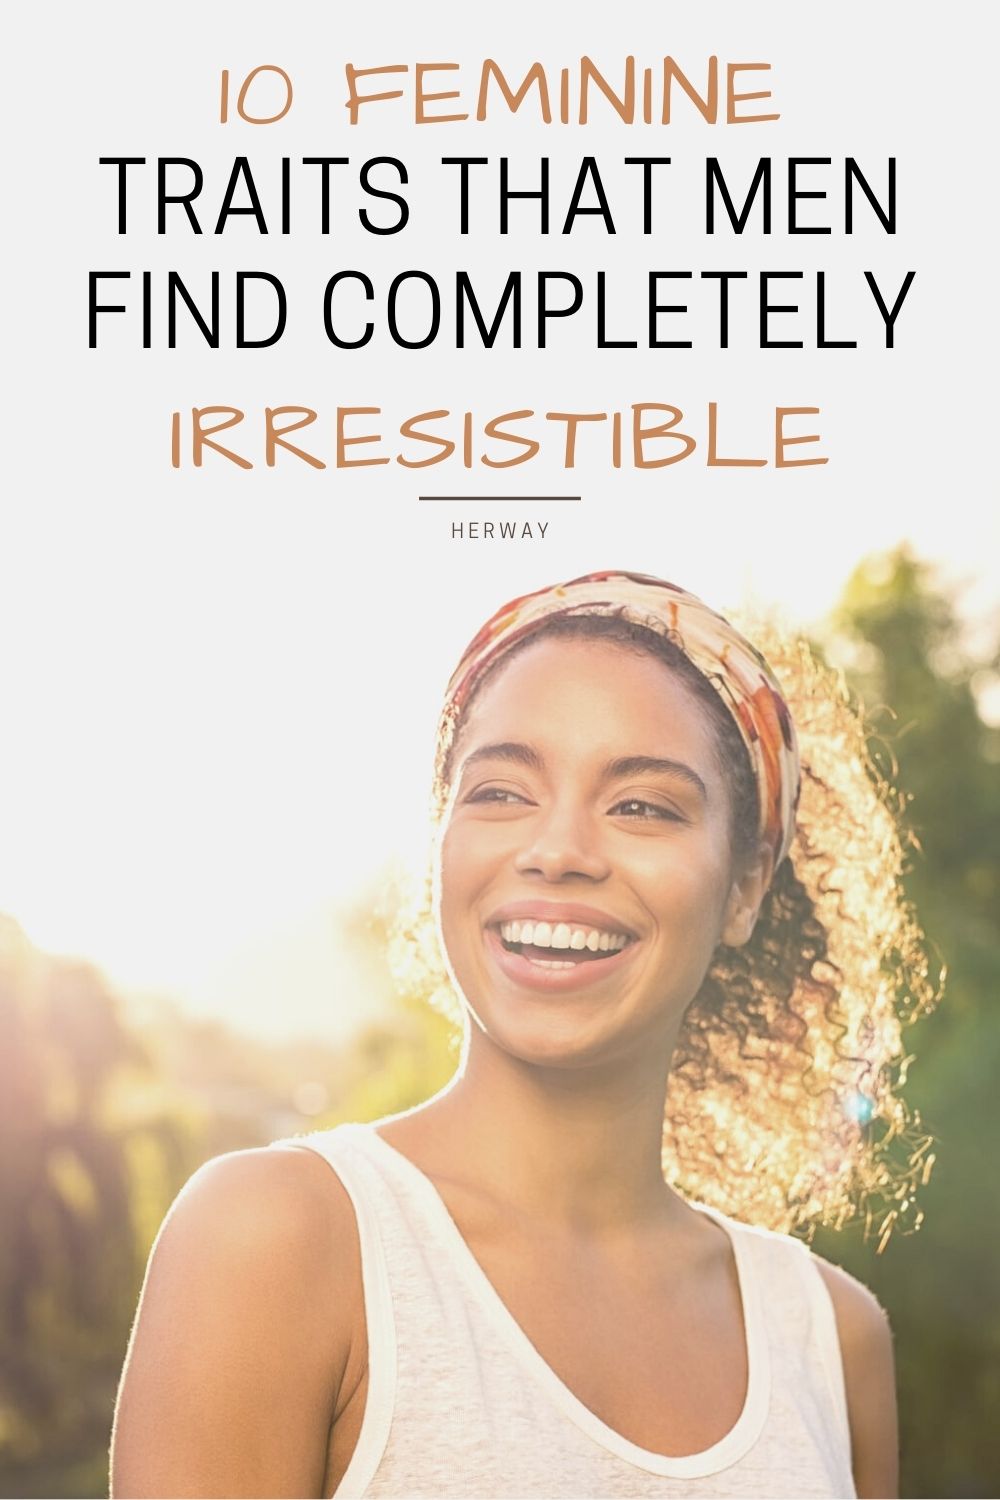 10 Feminine Traits That Men Find Completely Irresistible